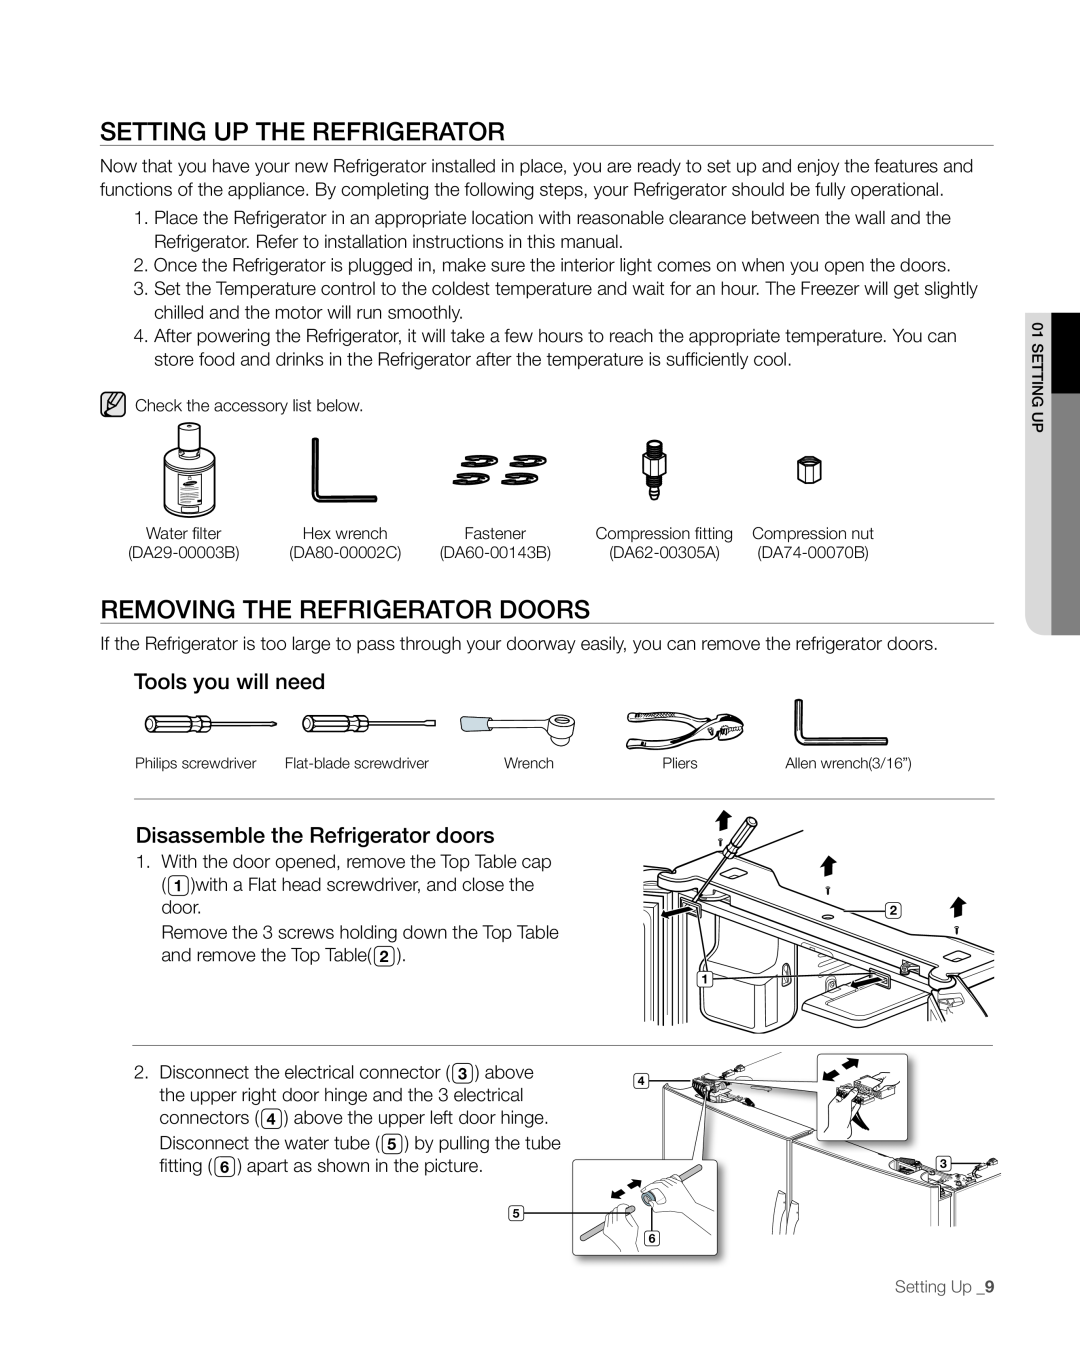 Sears RFG297AA manual setting uP tHe ReFRigeRAtoR, Removing the refrigerator doors, Tools you will need 